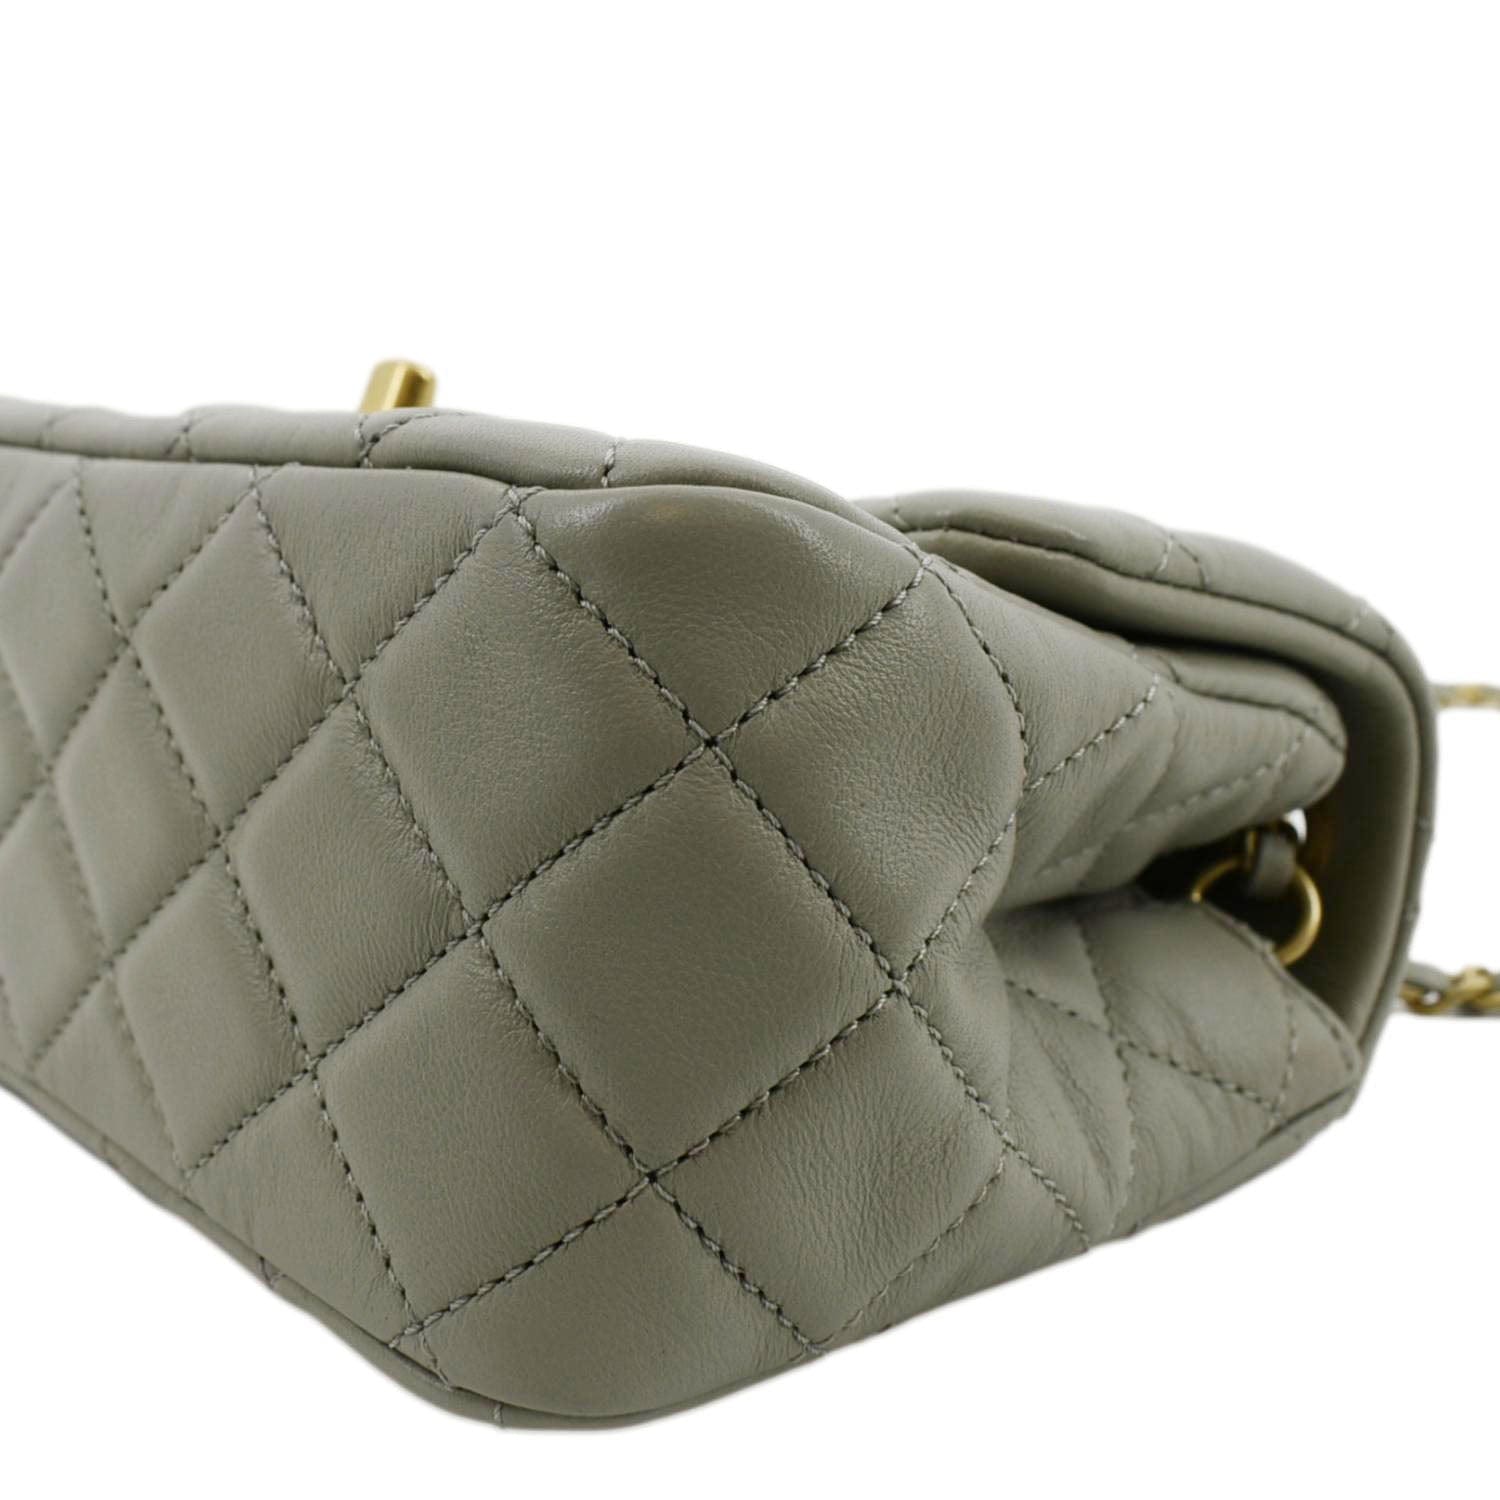 Authentic Chanel Seafoam Green Lambskin Quilted Rectangular Mini Flap Bag